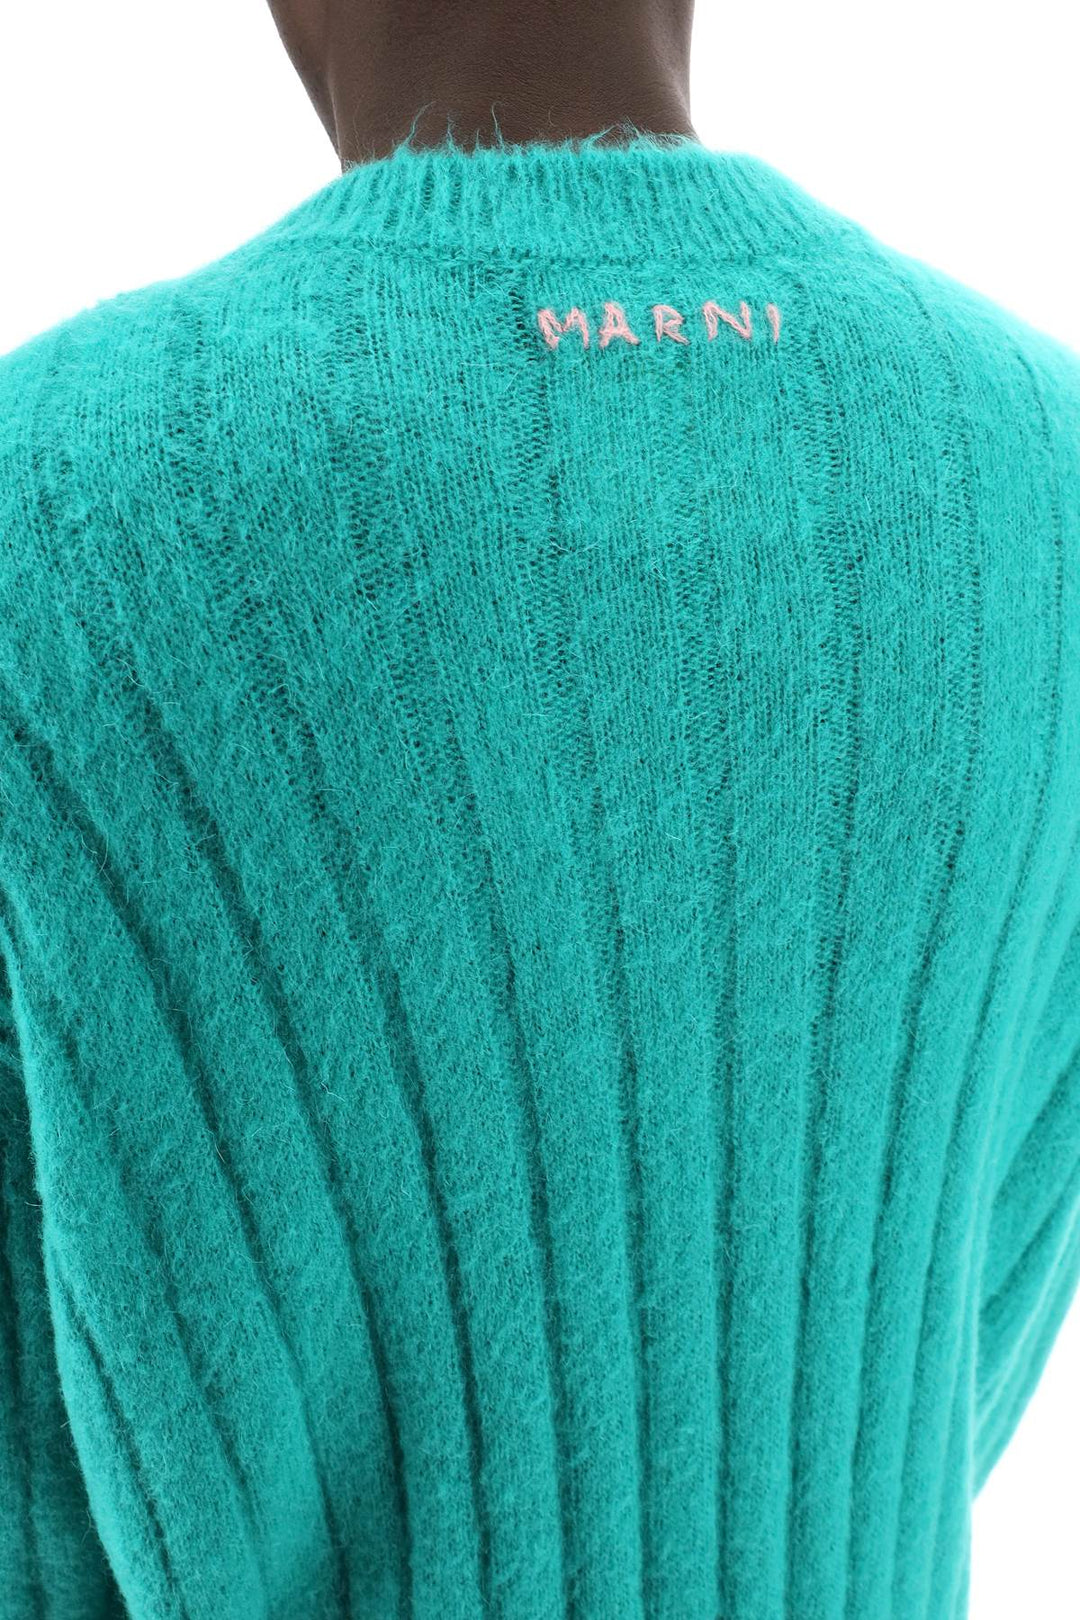 Marni Brushed Mohair Pul   Green